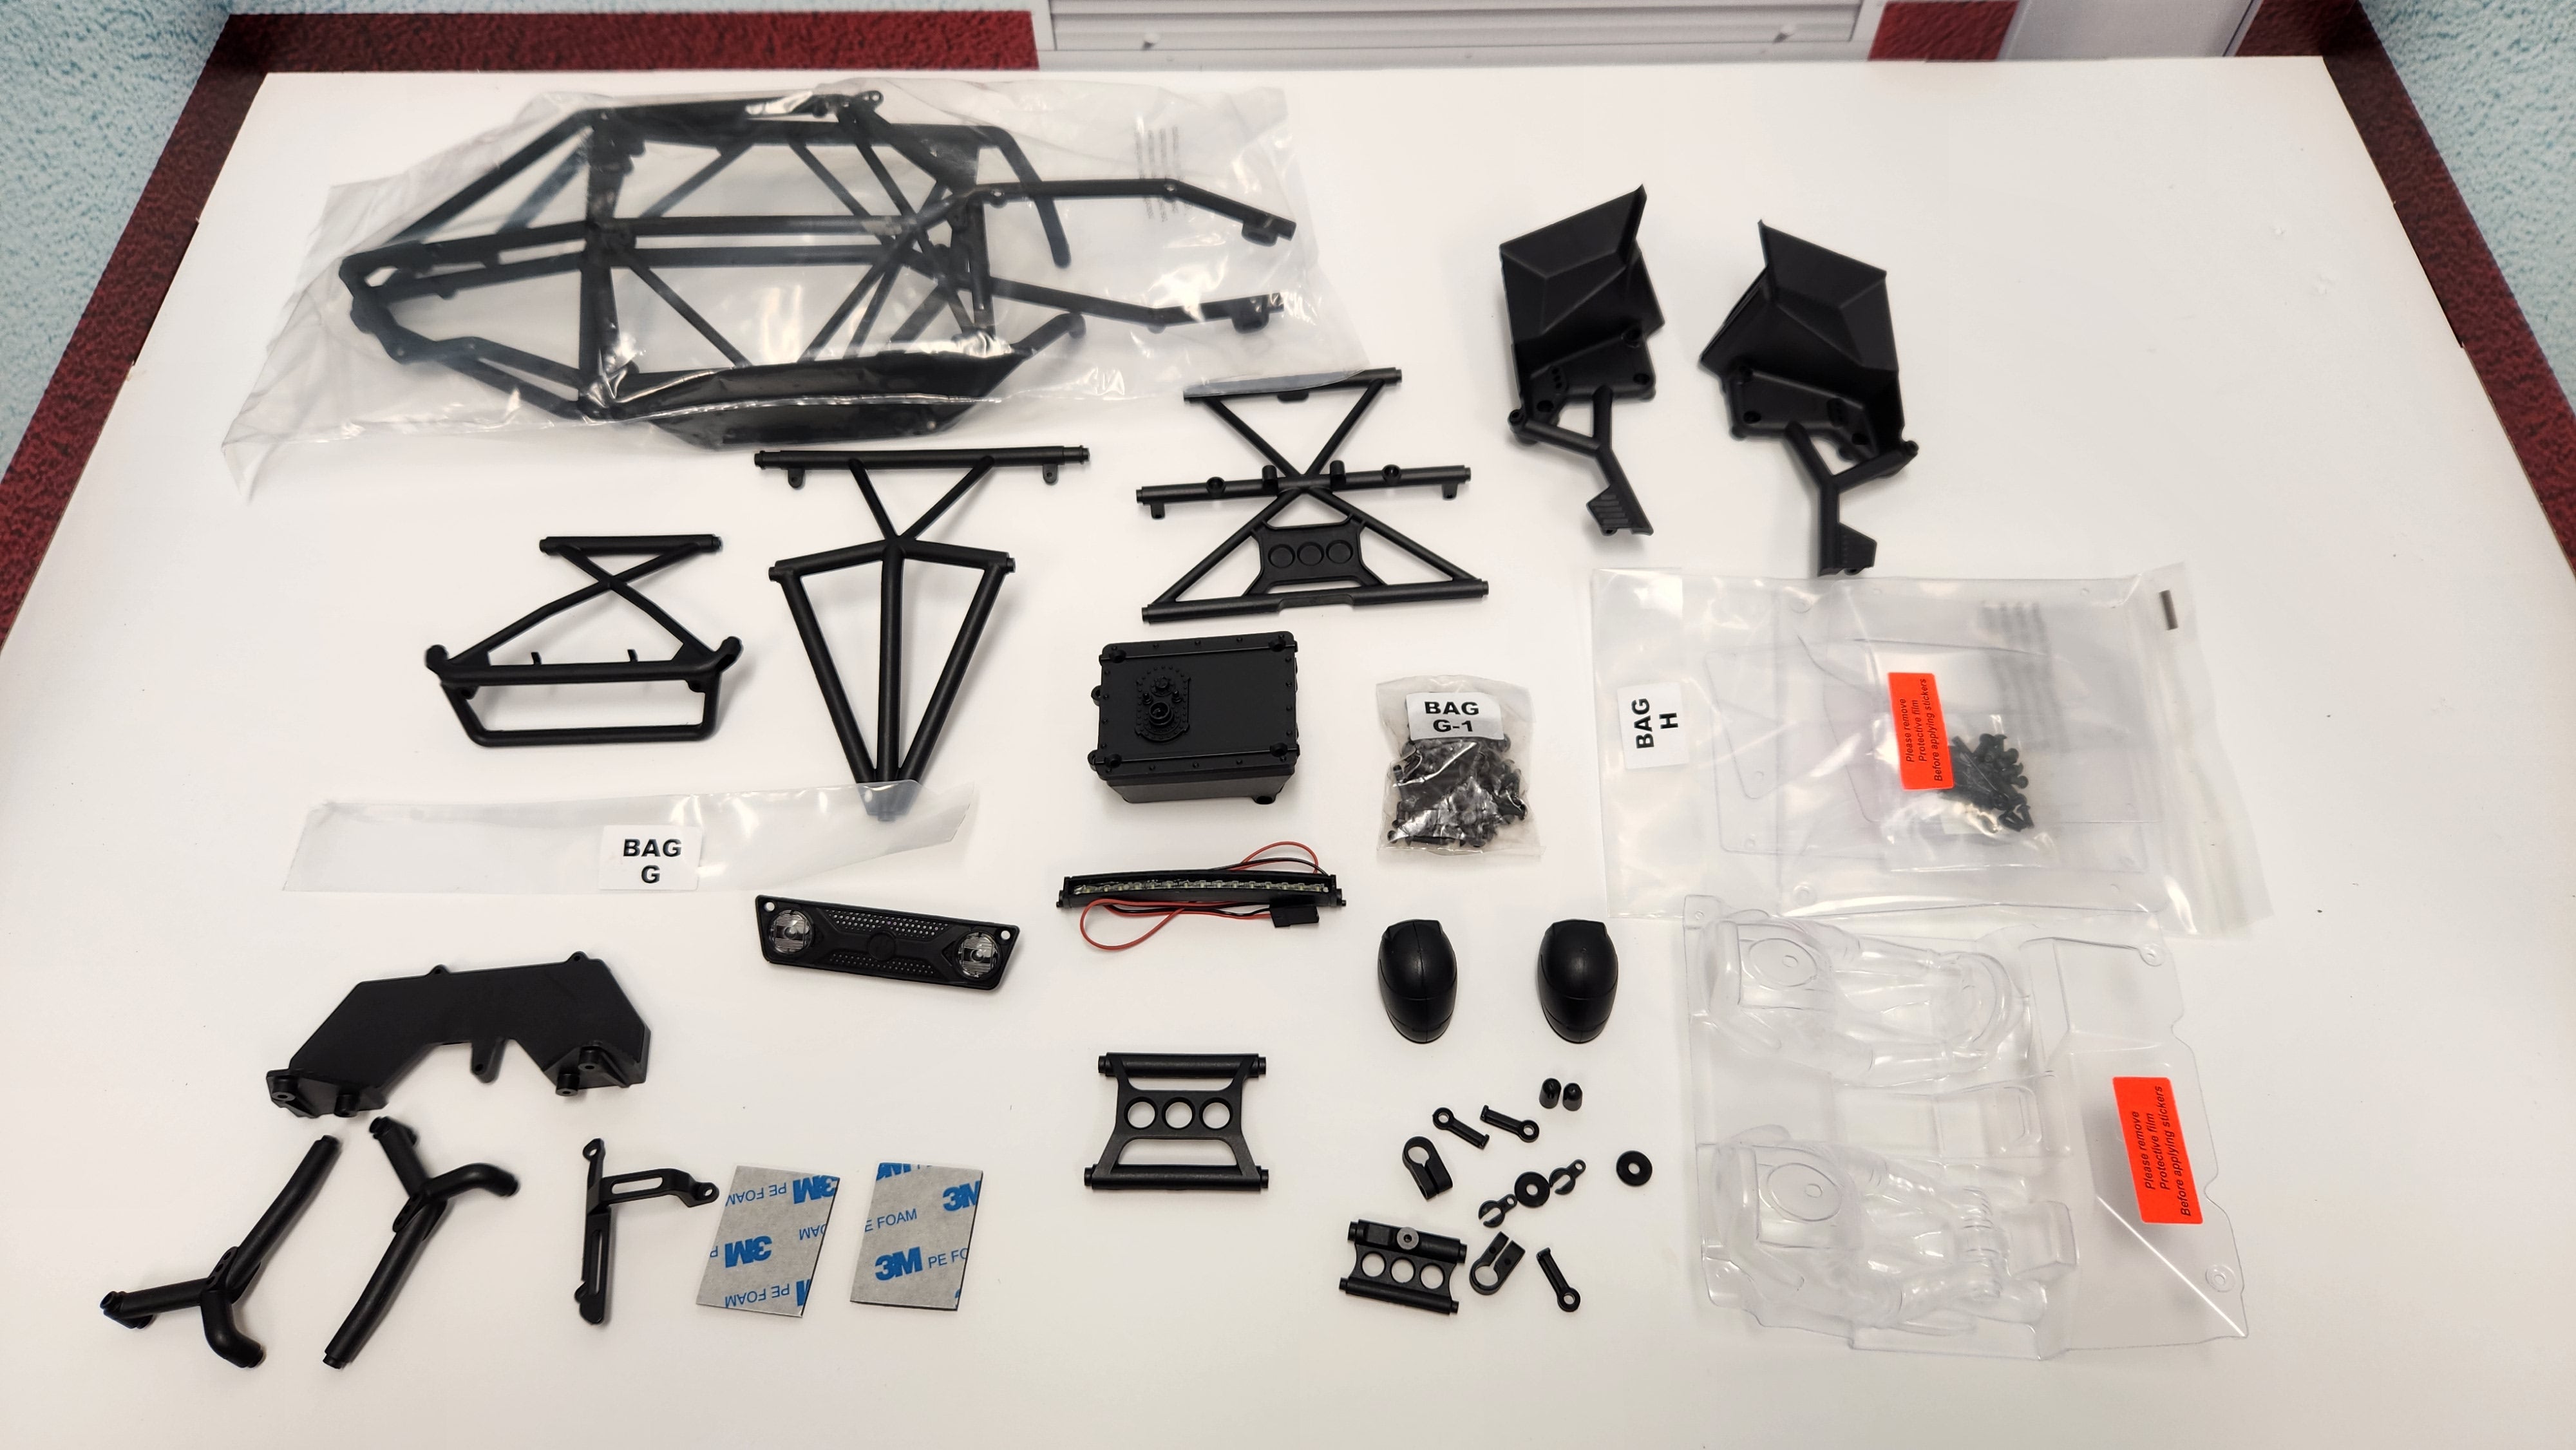 Axial Capra stock plastic cage, panels, decals and light bar